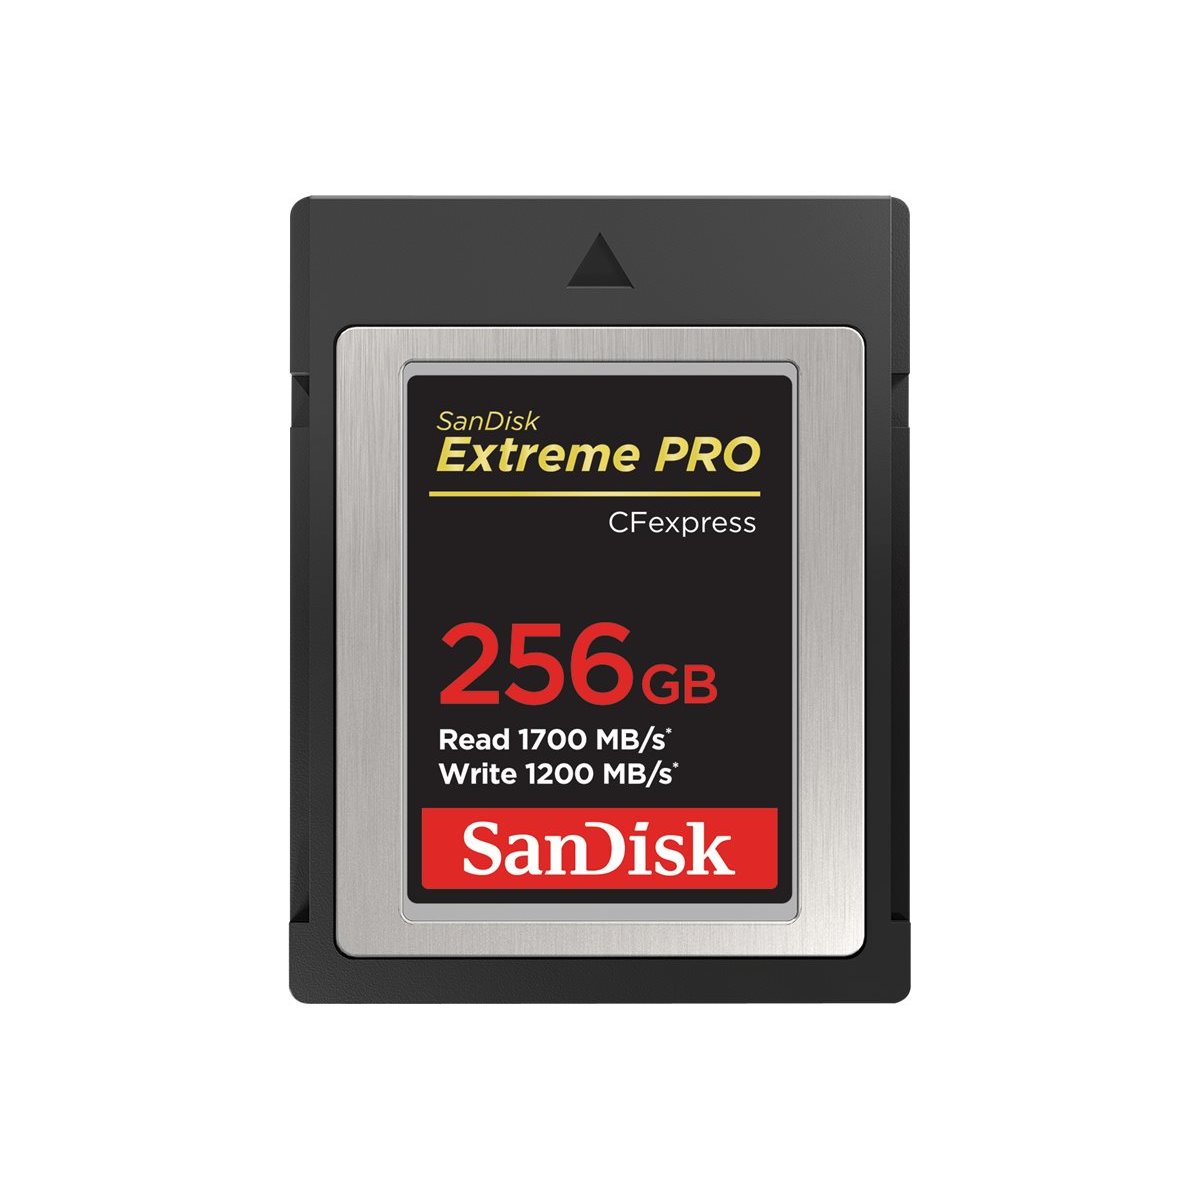 SanDisk Extreme Pro CFexpress Card 256GB, Type B, 1700MB-s Read, 1200MB-s Write